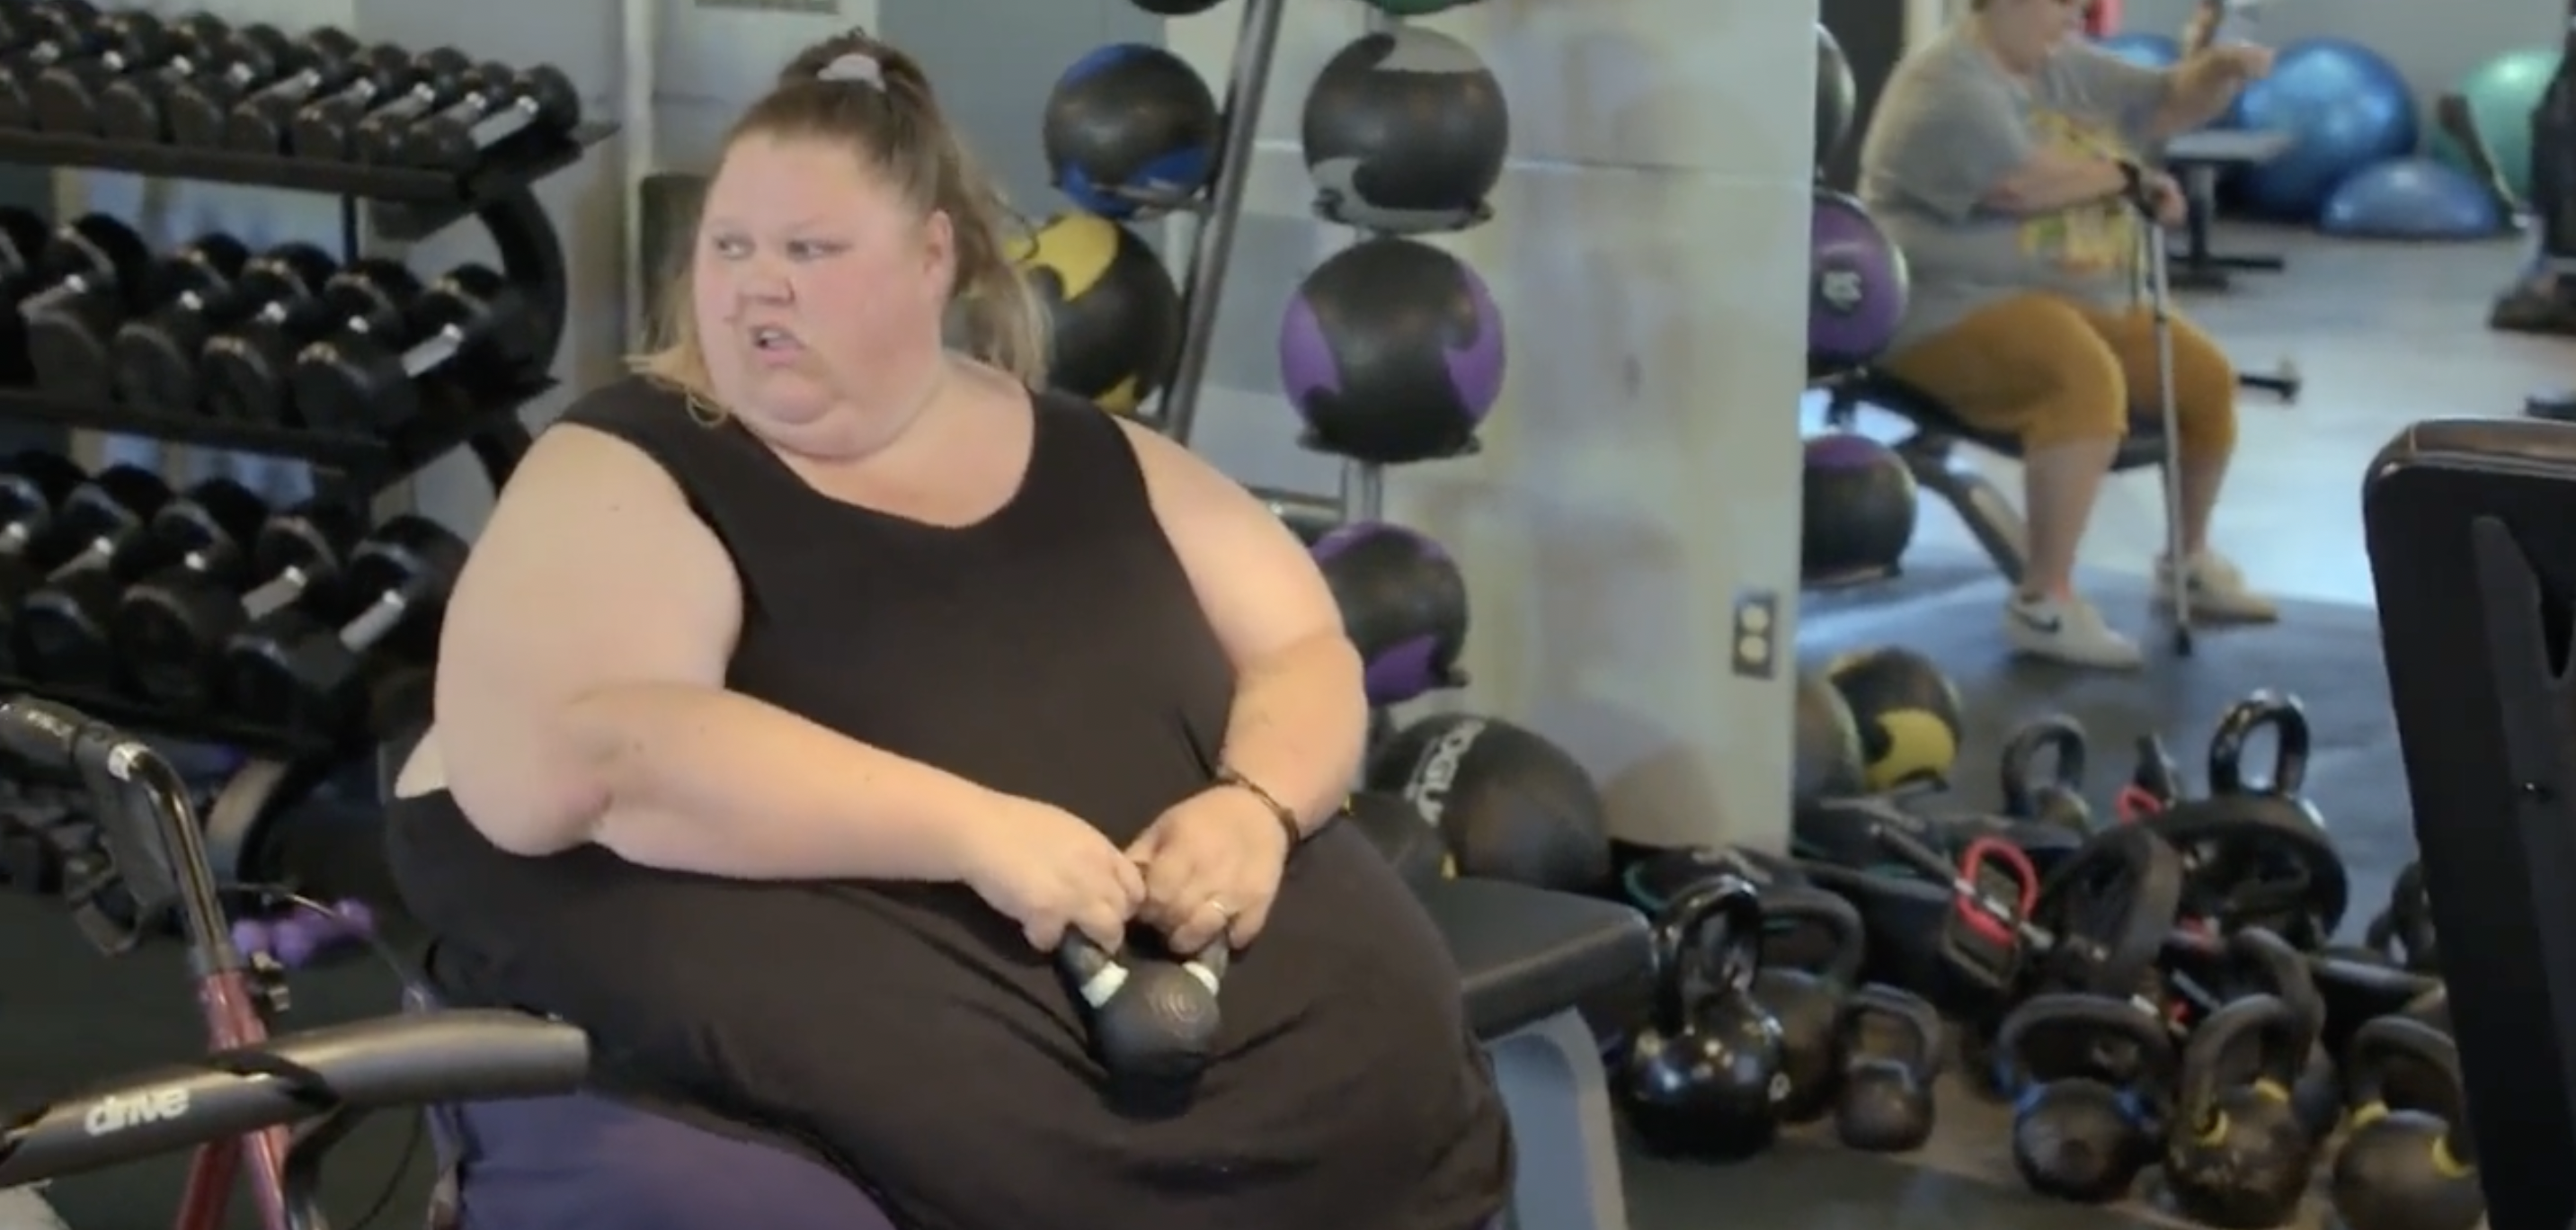 My 600 lb Life's Stephanie had a change of heart in her weight loss journey